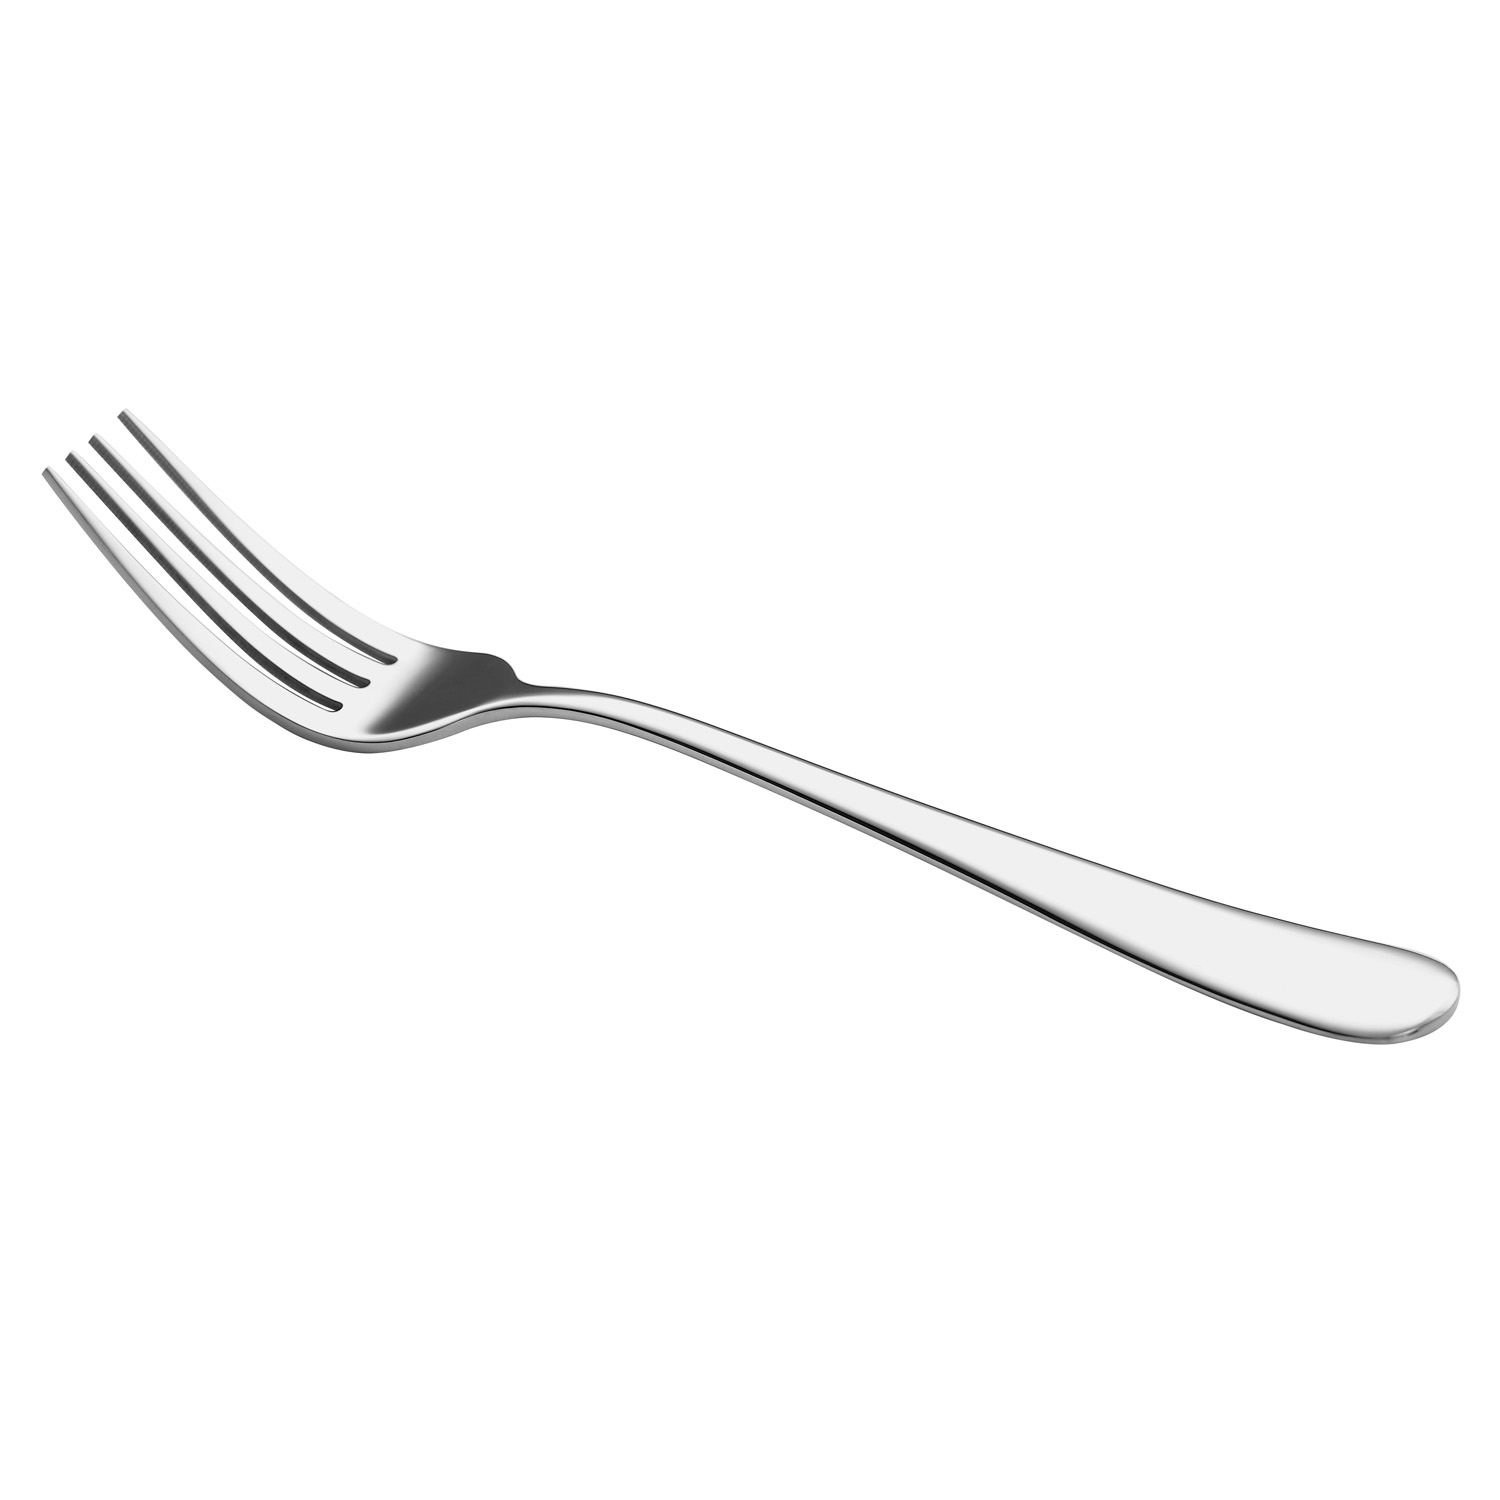 CAC China 8003-11 Noble Table Fork, Extra Heavyweight 18/8, 8 3/8"